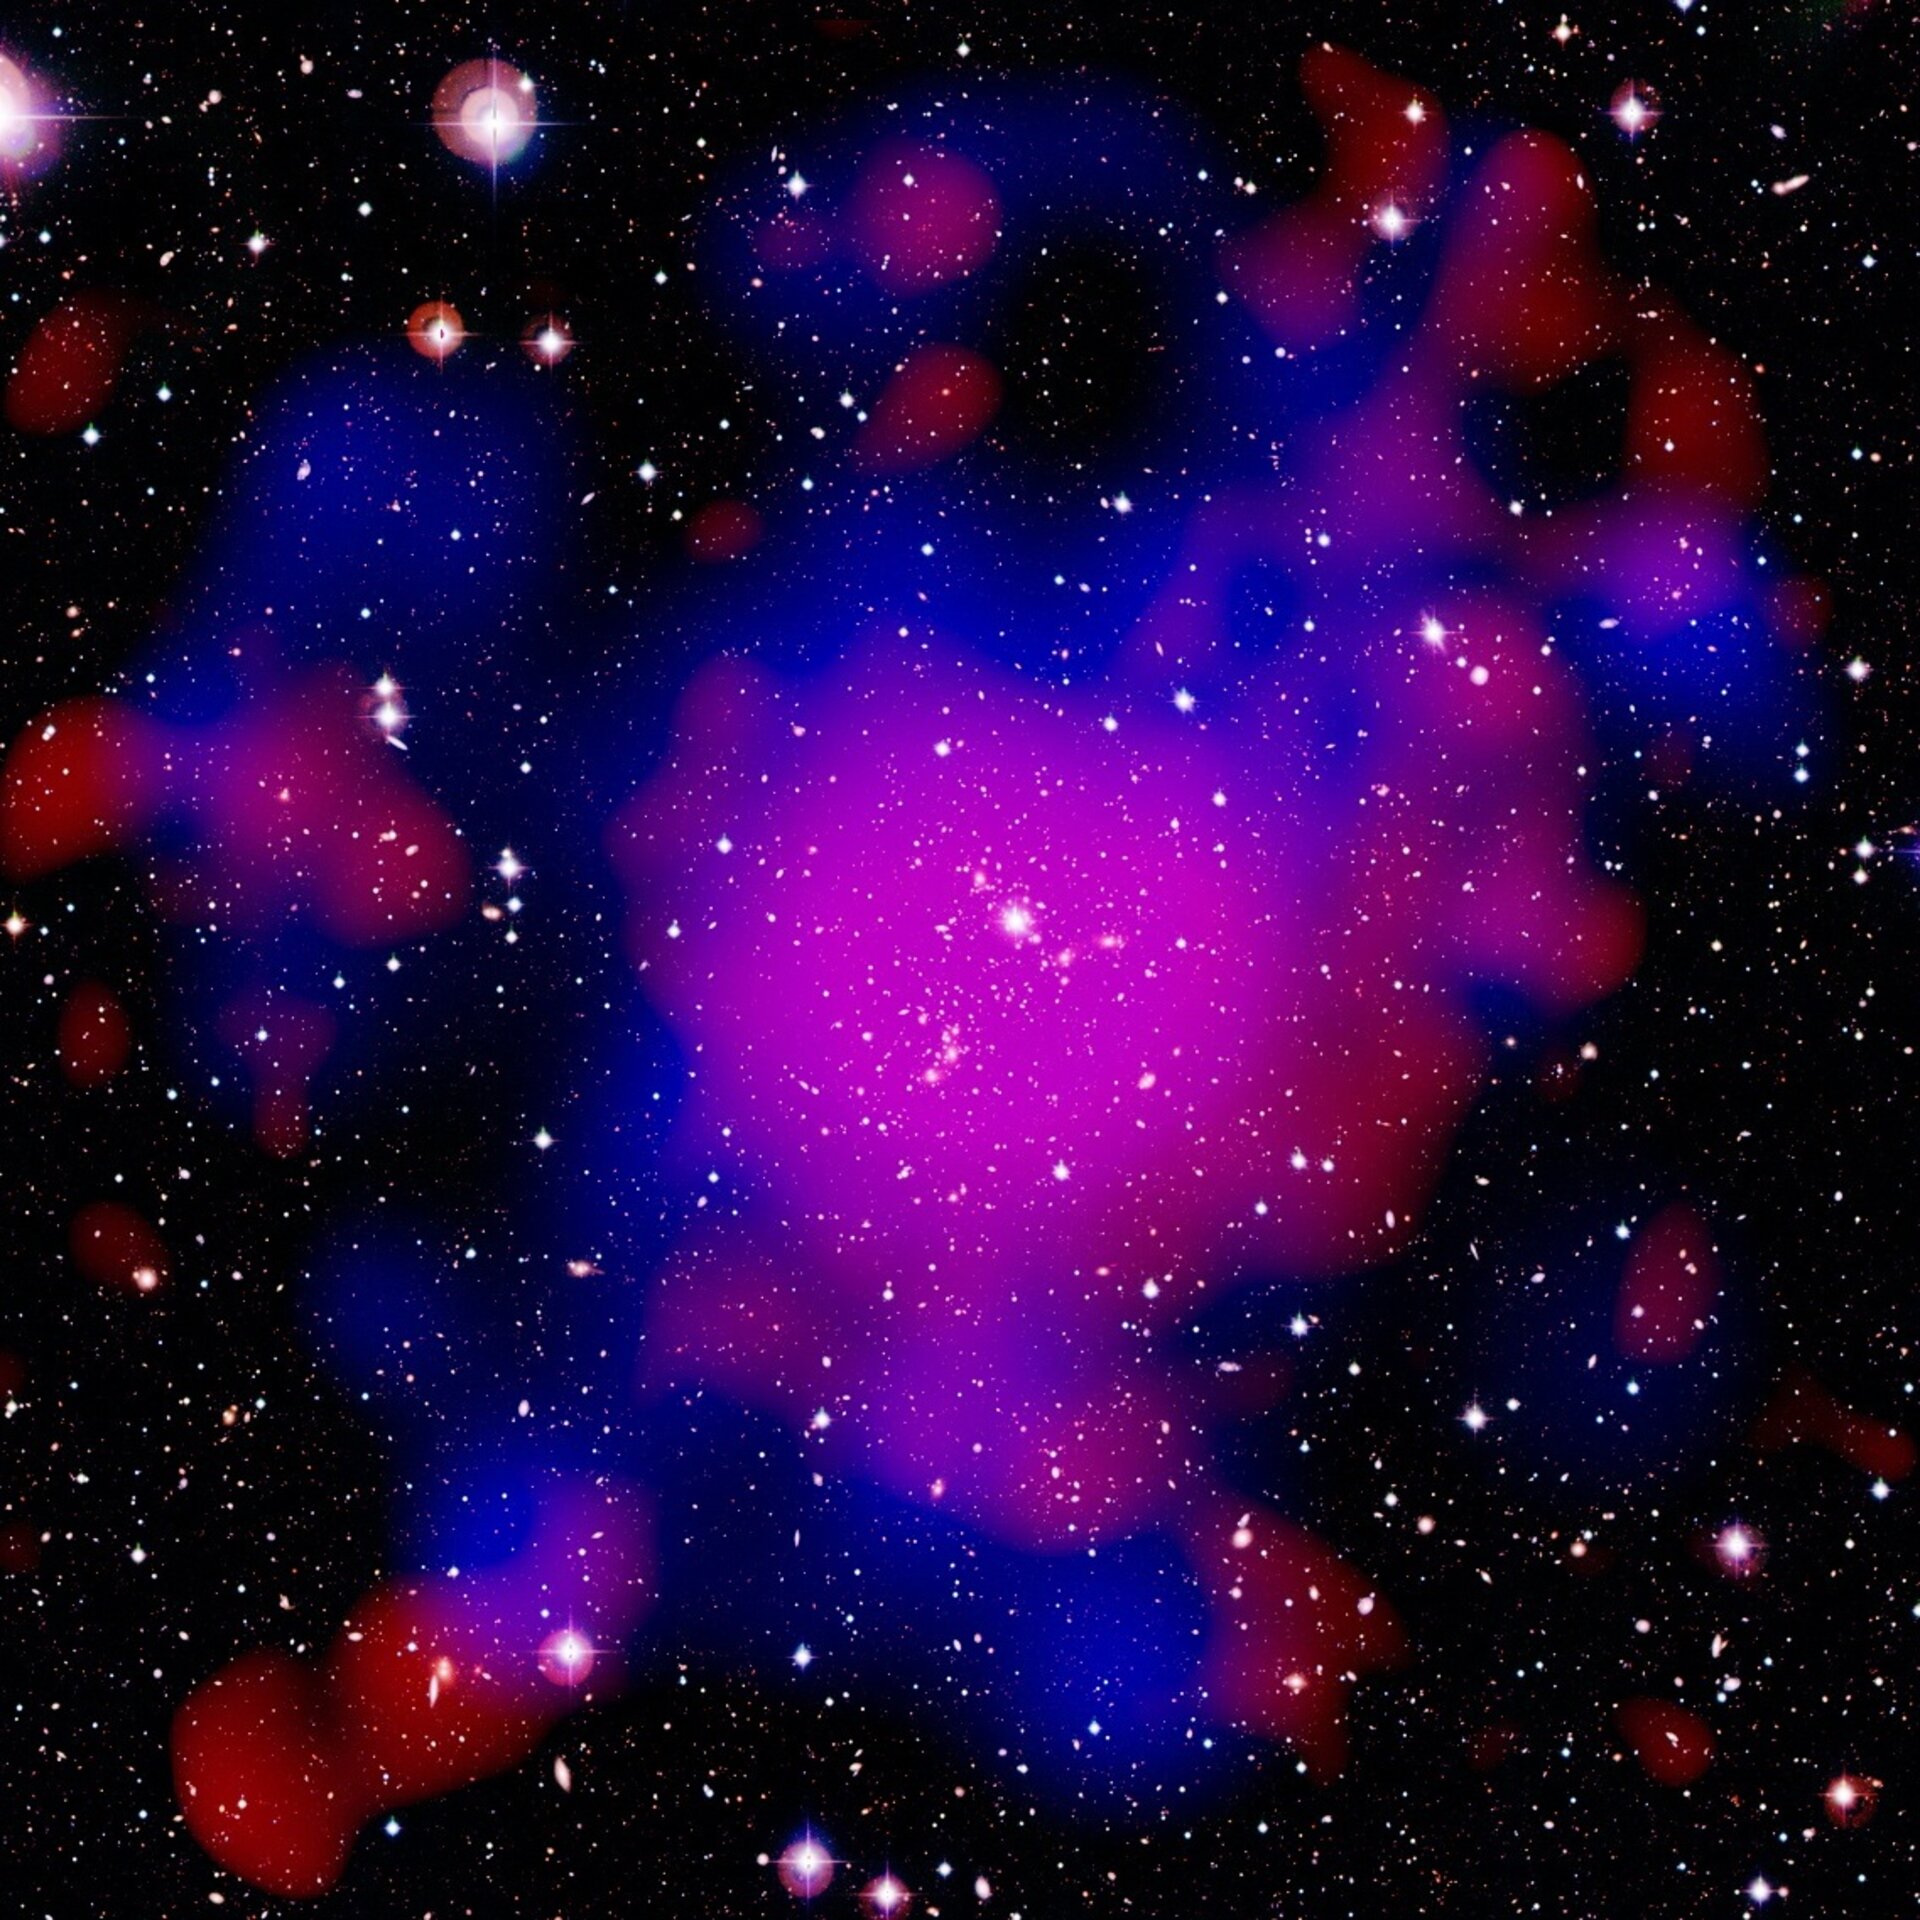 Galaxy Cluster Abell 2744